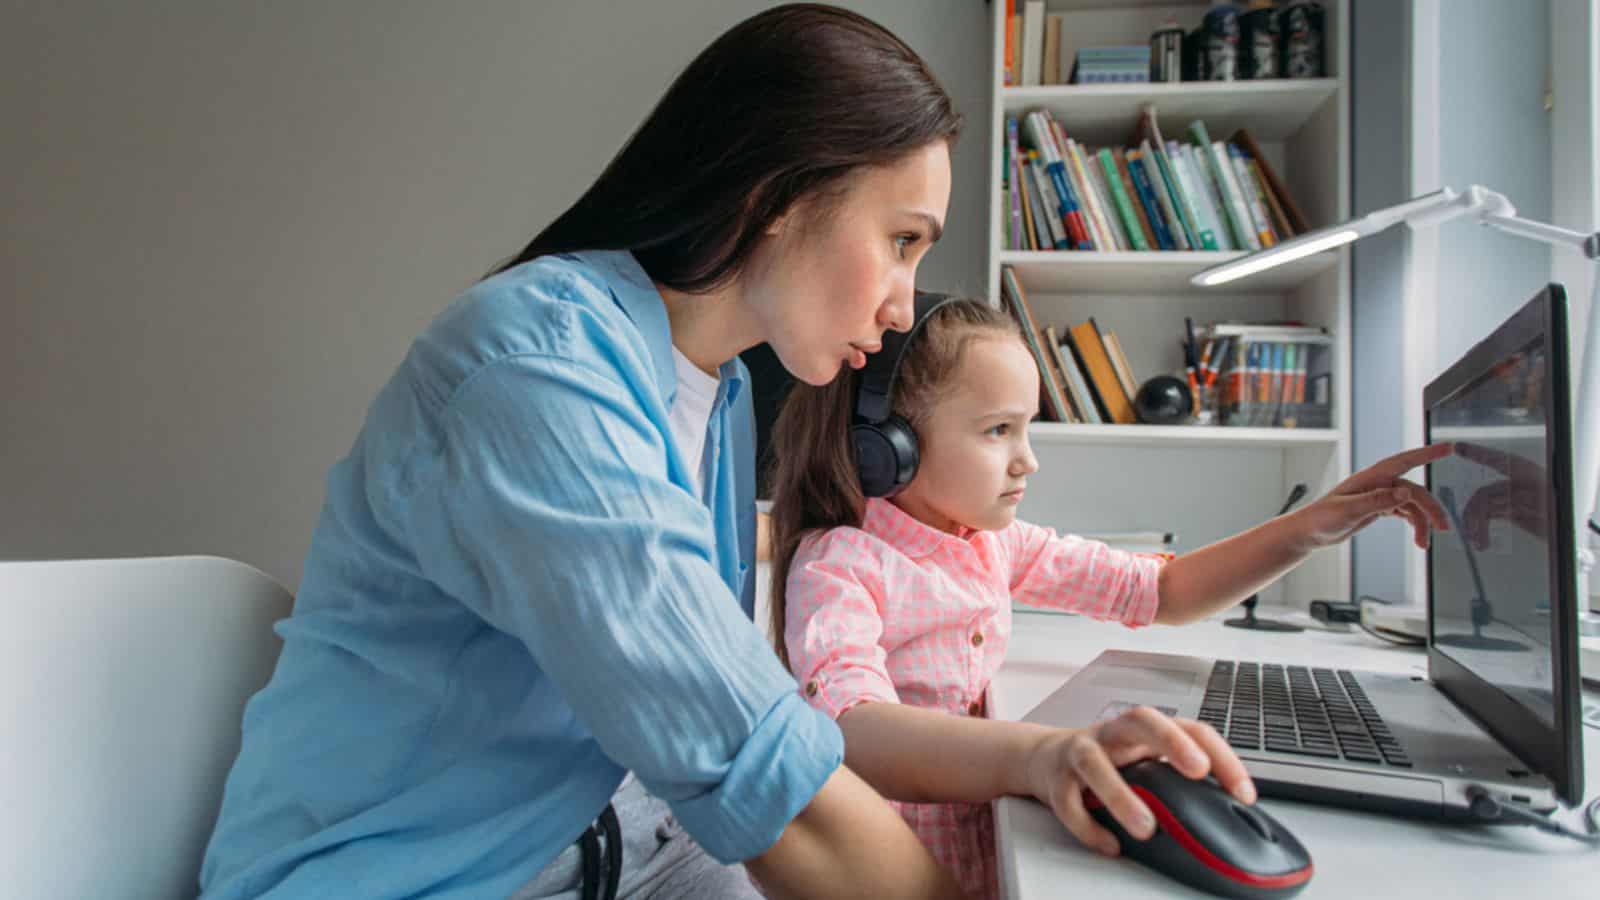 Mom and daughter are at home using laptop